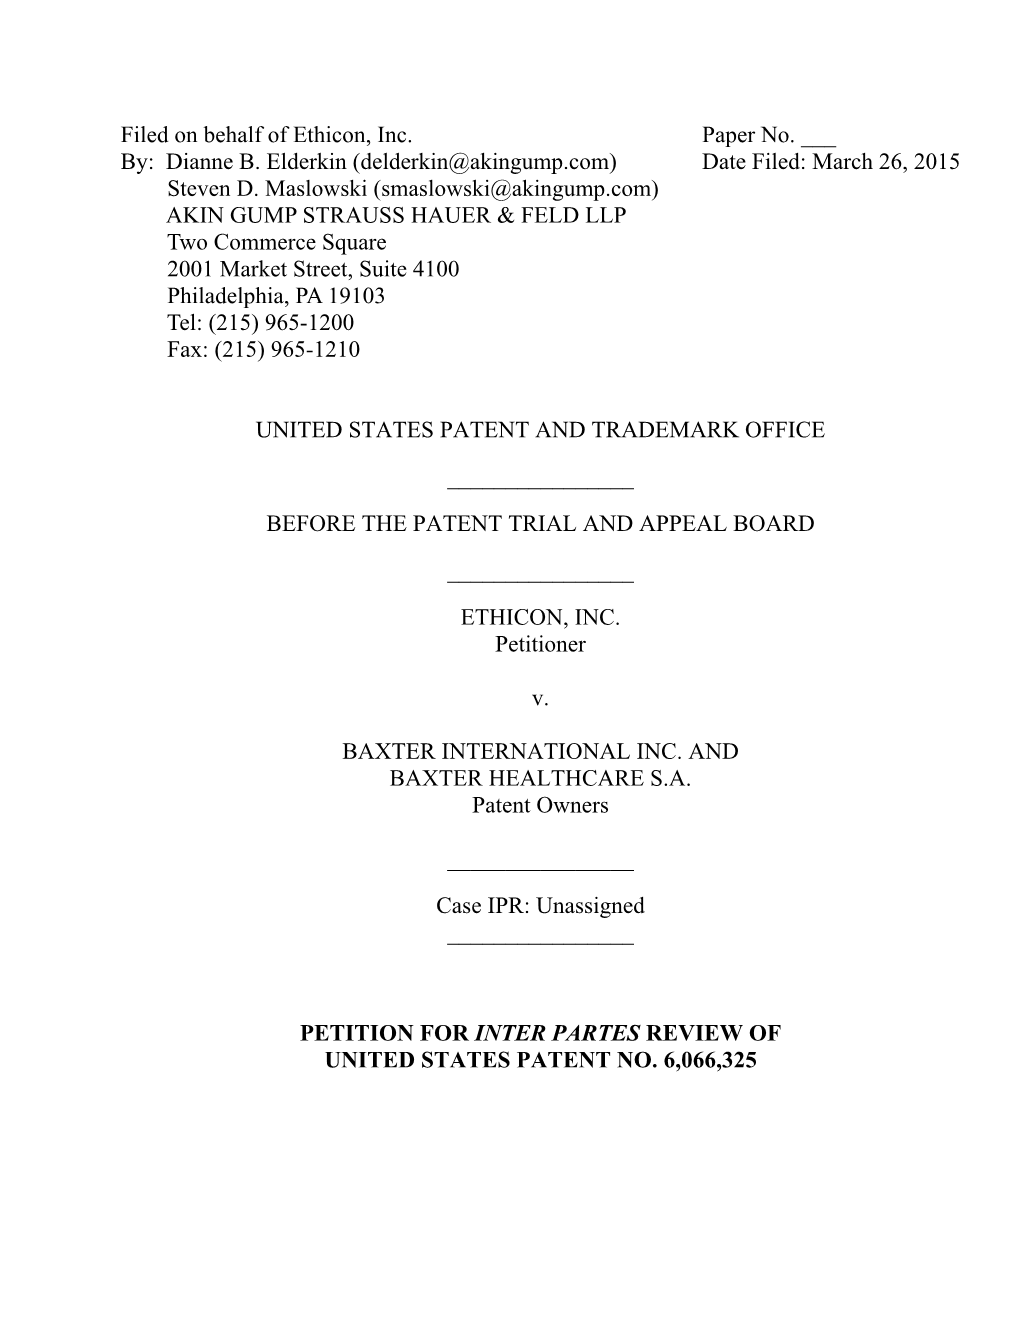 Filed on Behalf of Ethicon, Inc. Paper No